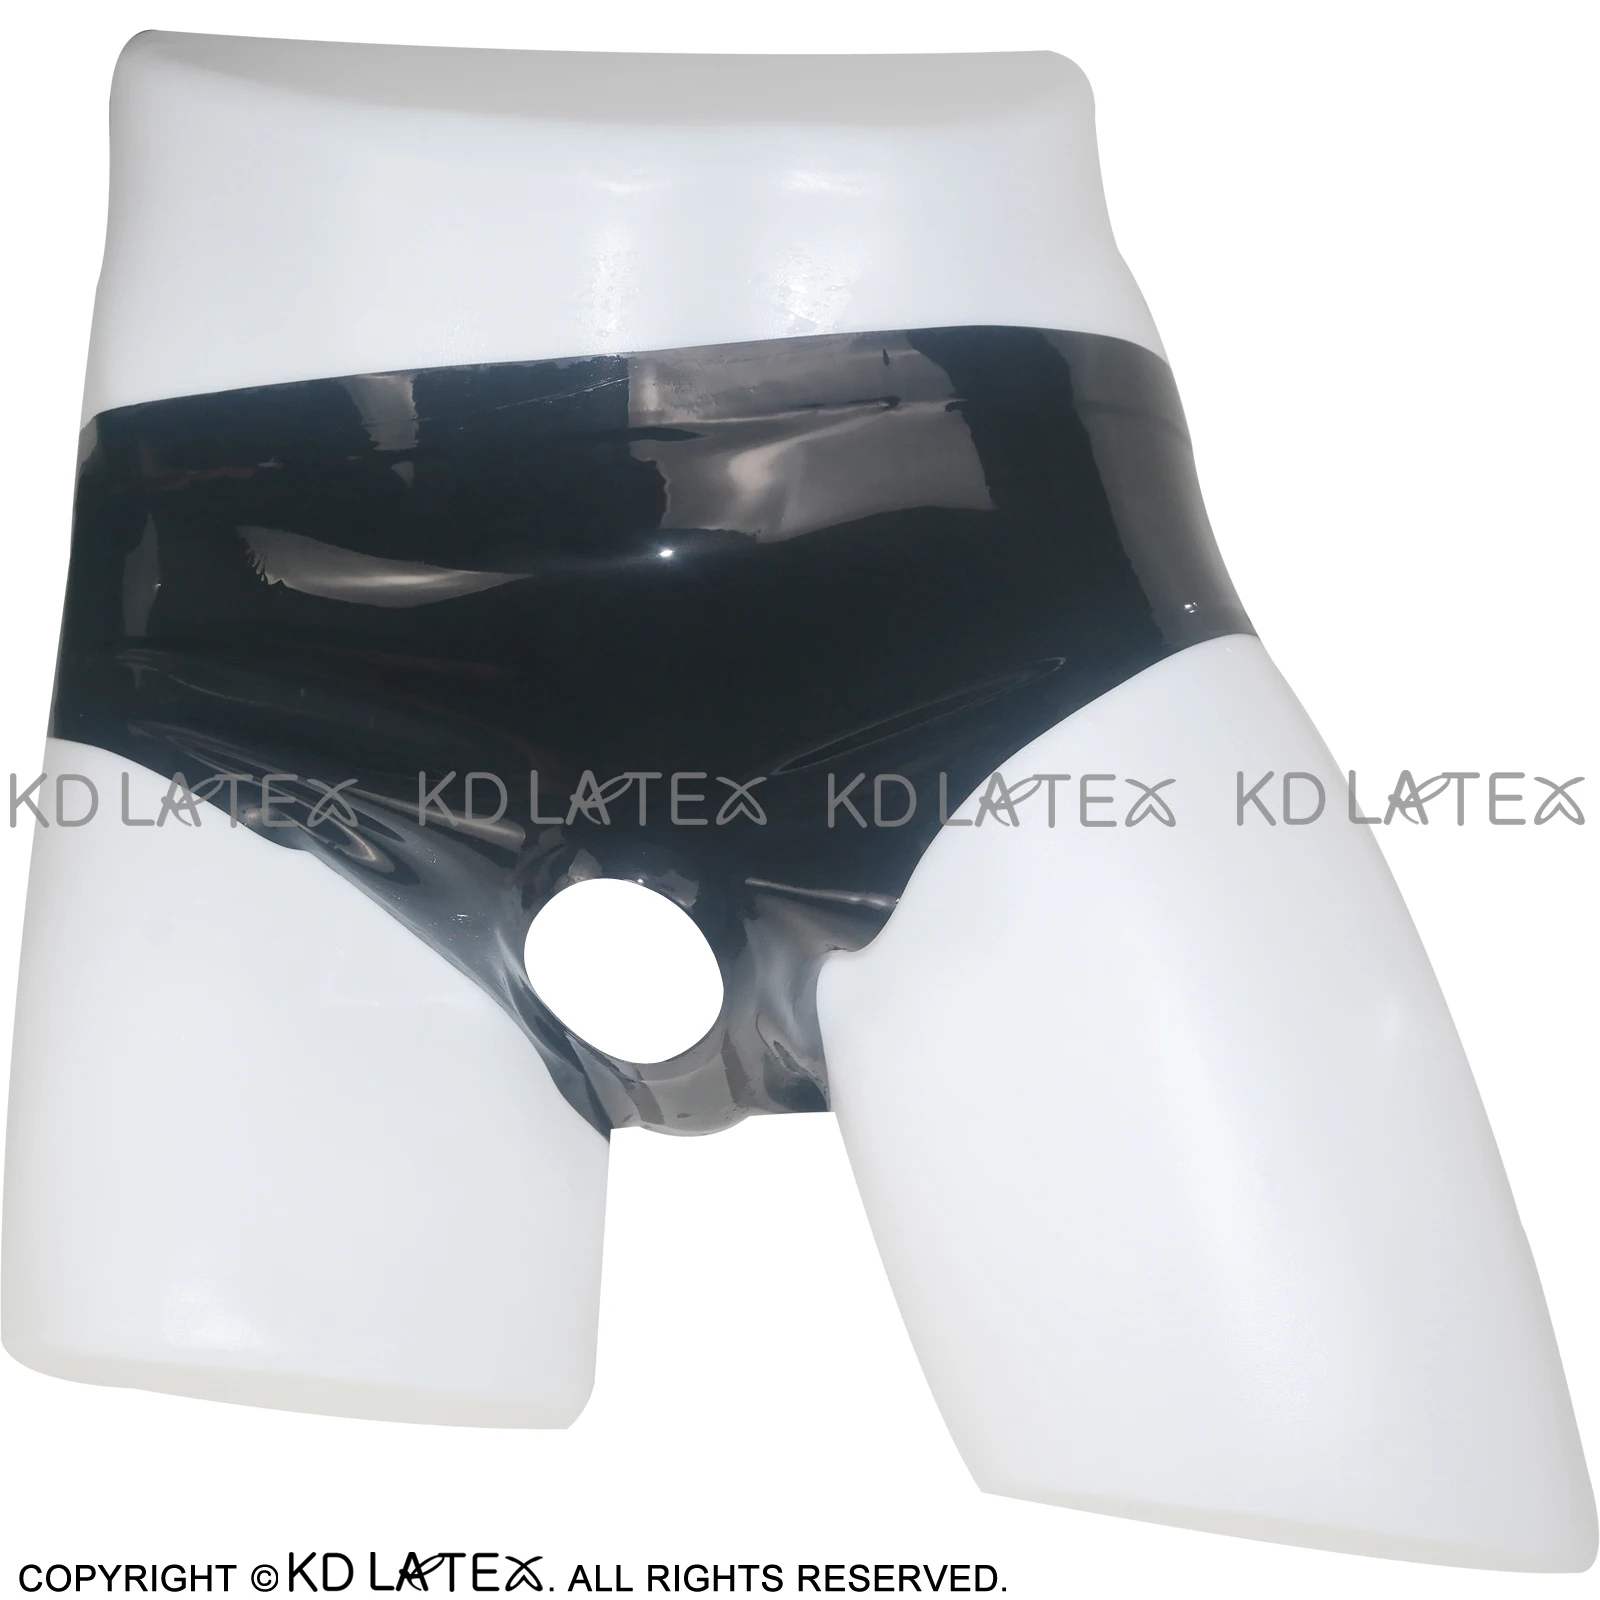 

Black Sexy Latex Underwear With Holes In Front Rubber Briefs Panties Underpants DK-0026